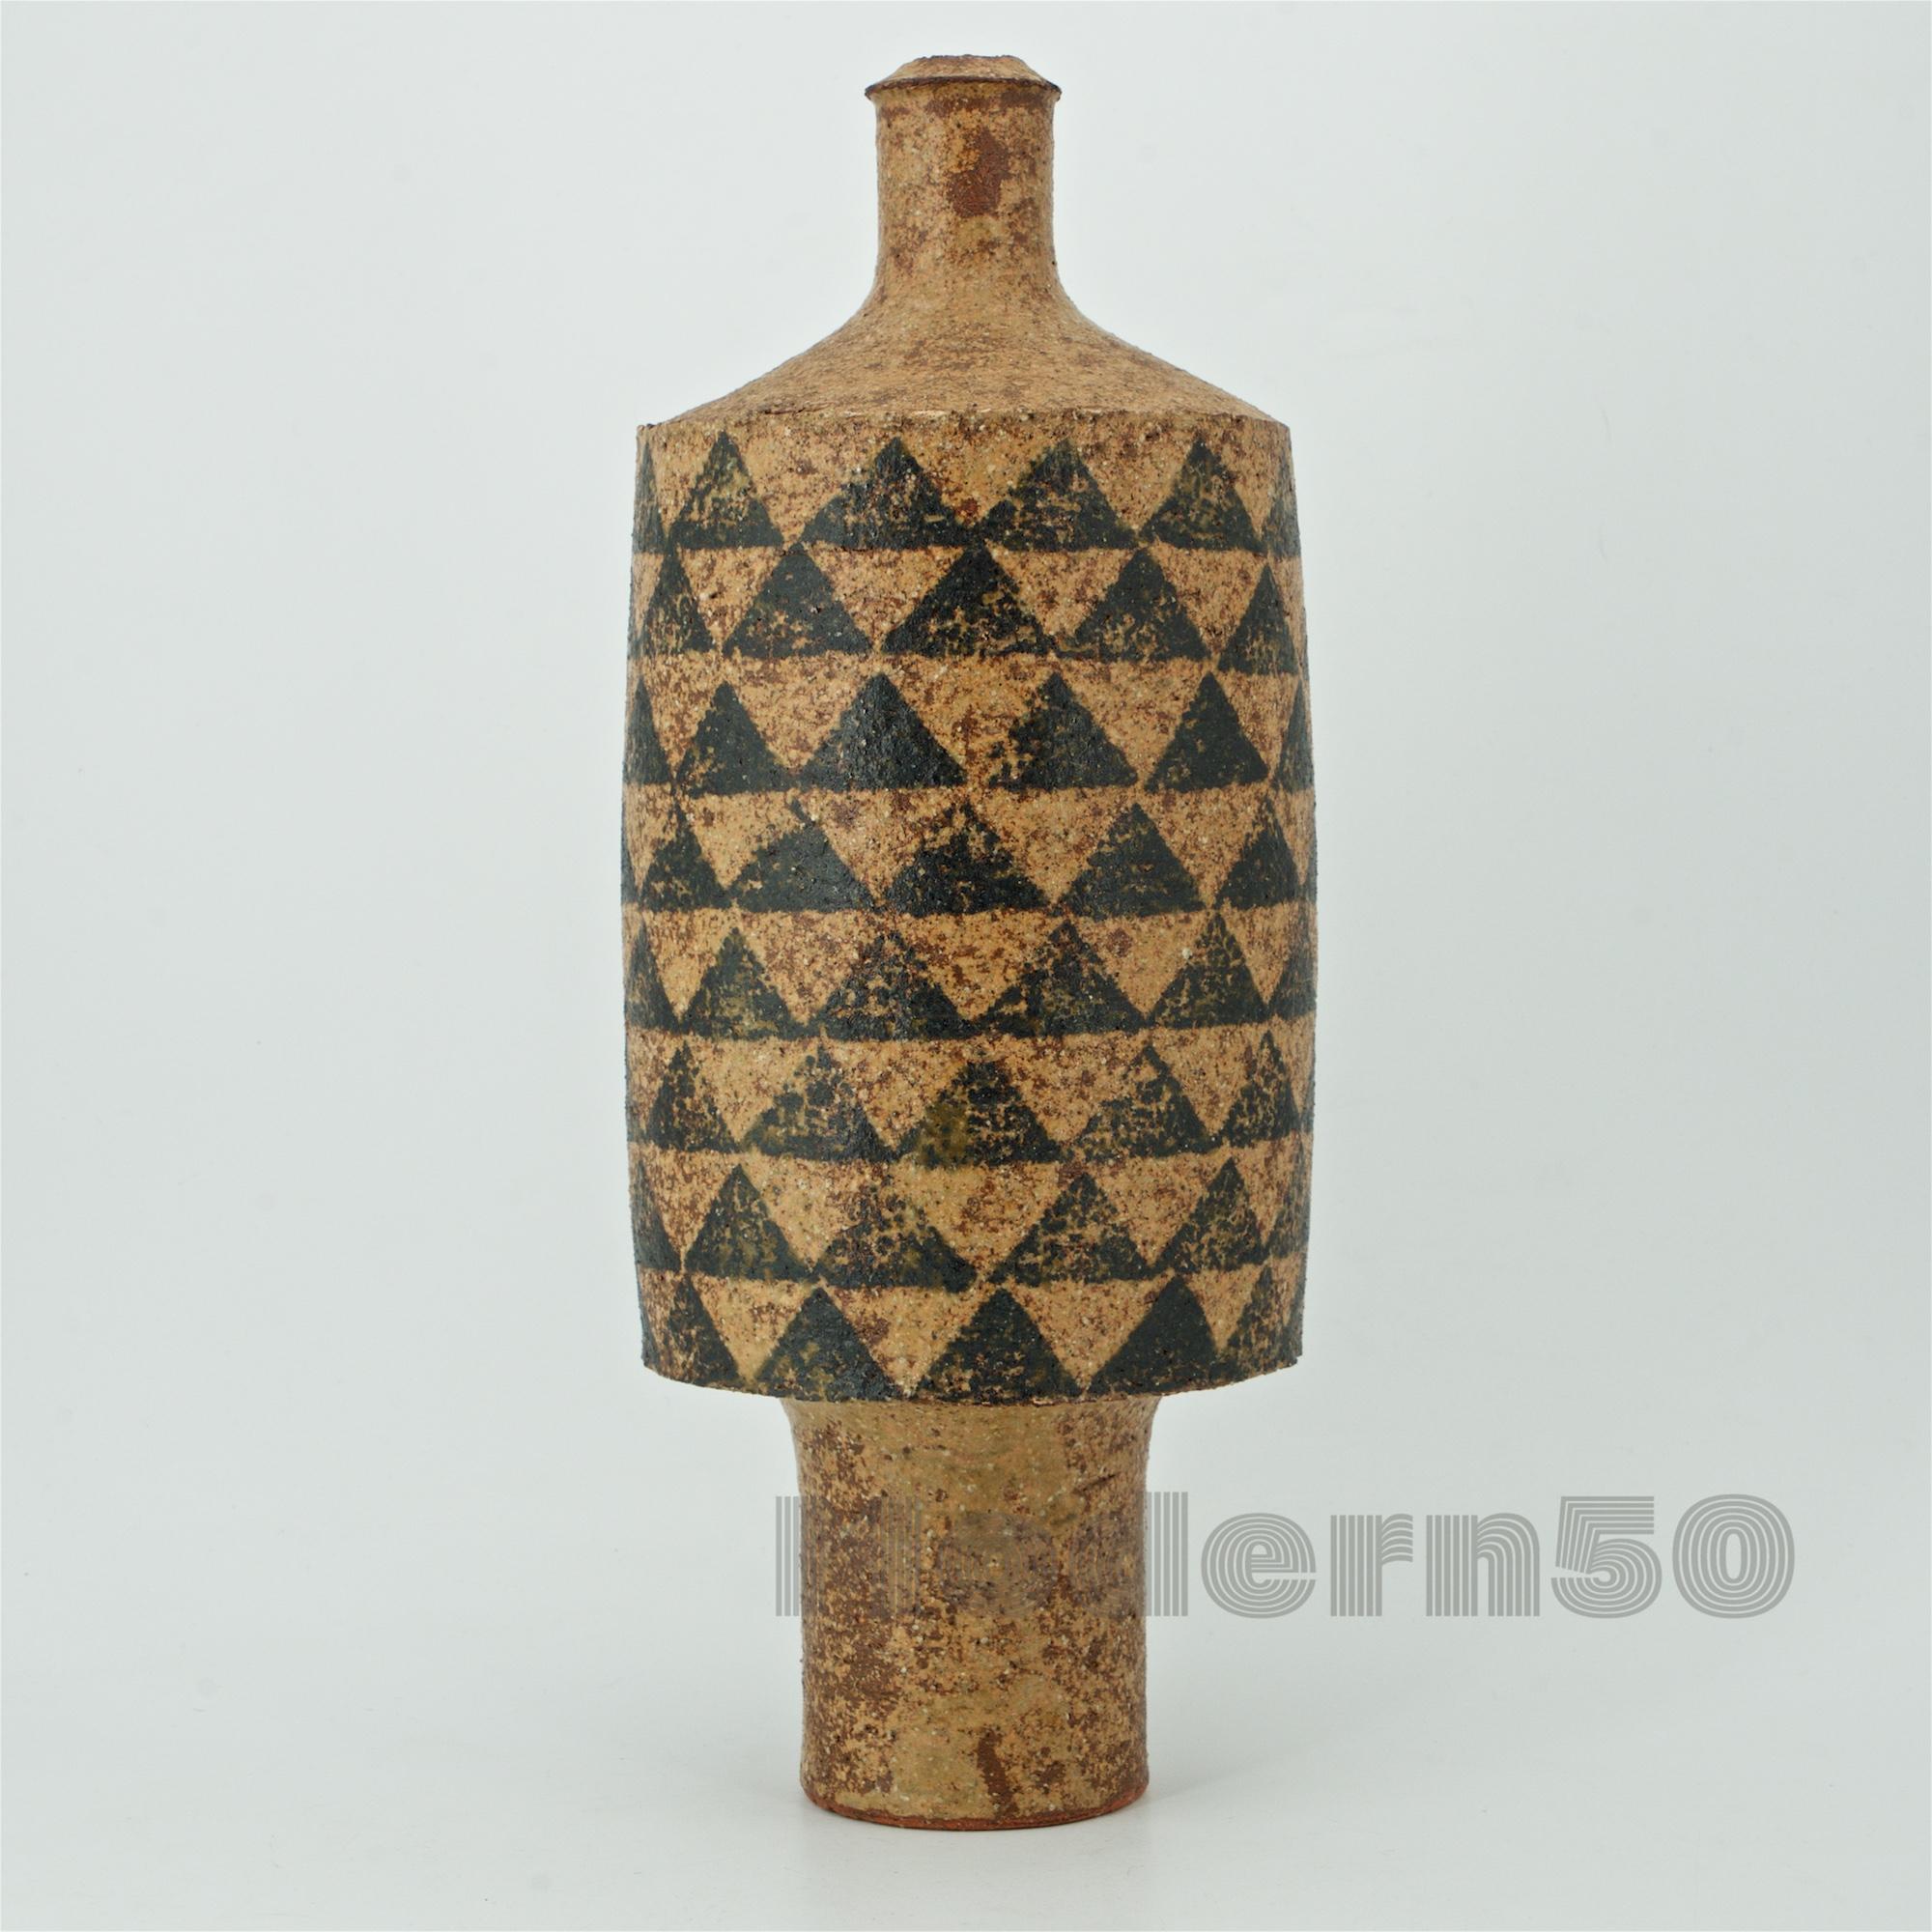 Appears to be a highly textured turned salt fired stoneware centerpiece vase/bottle, with nice stenciled or painted slip geometric triangle pattern completely around the body. No makers markings that we can find.